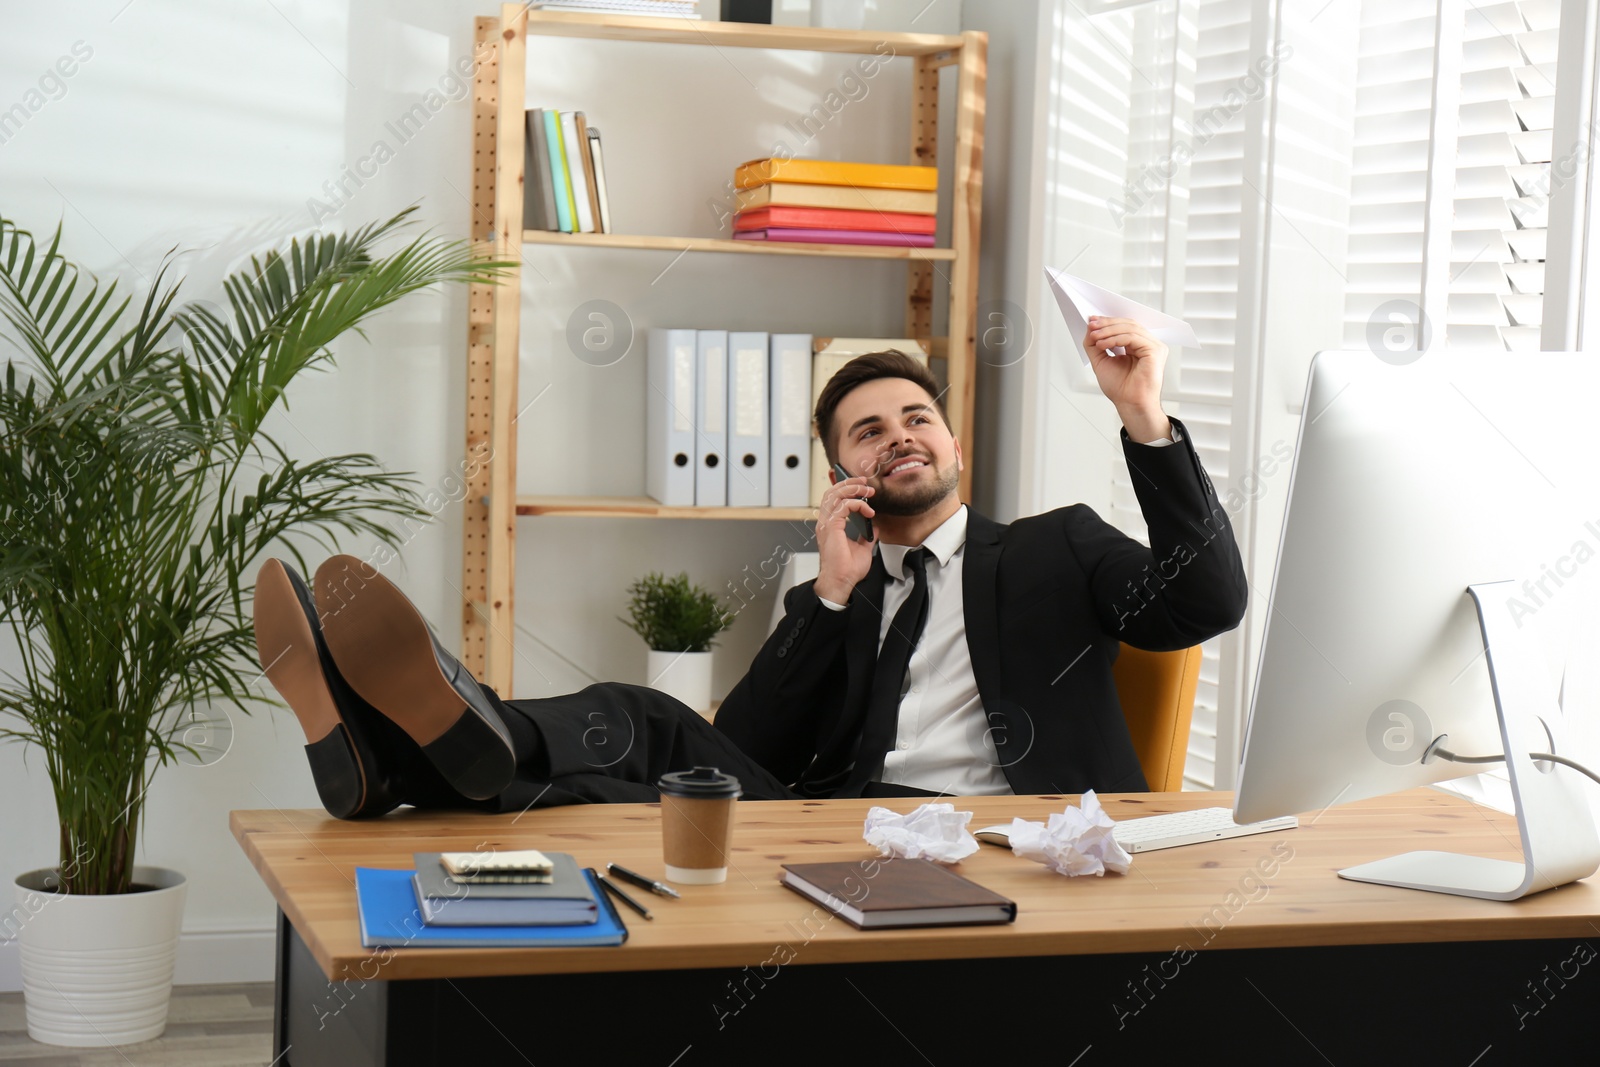 Photo of Lazy employee playing with paper plane at table in office